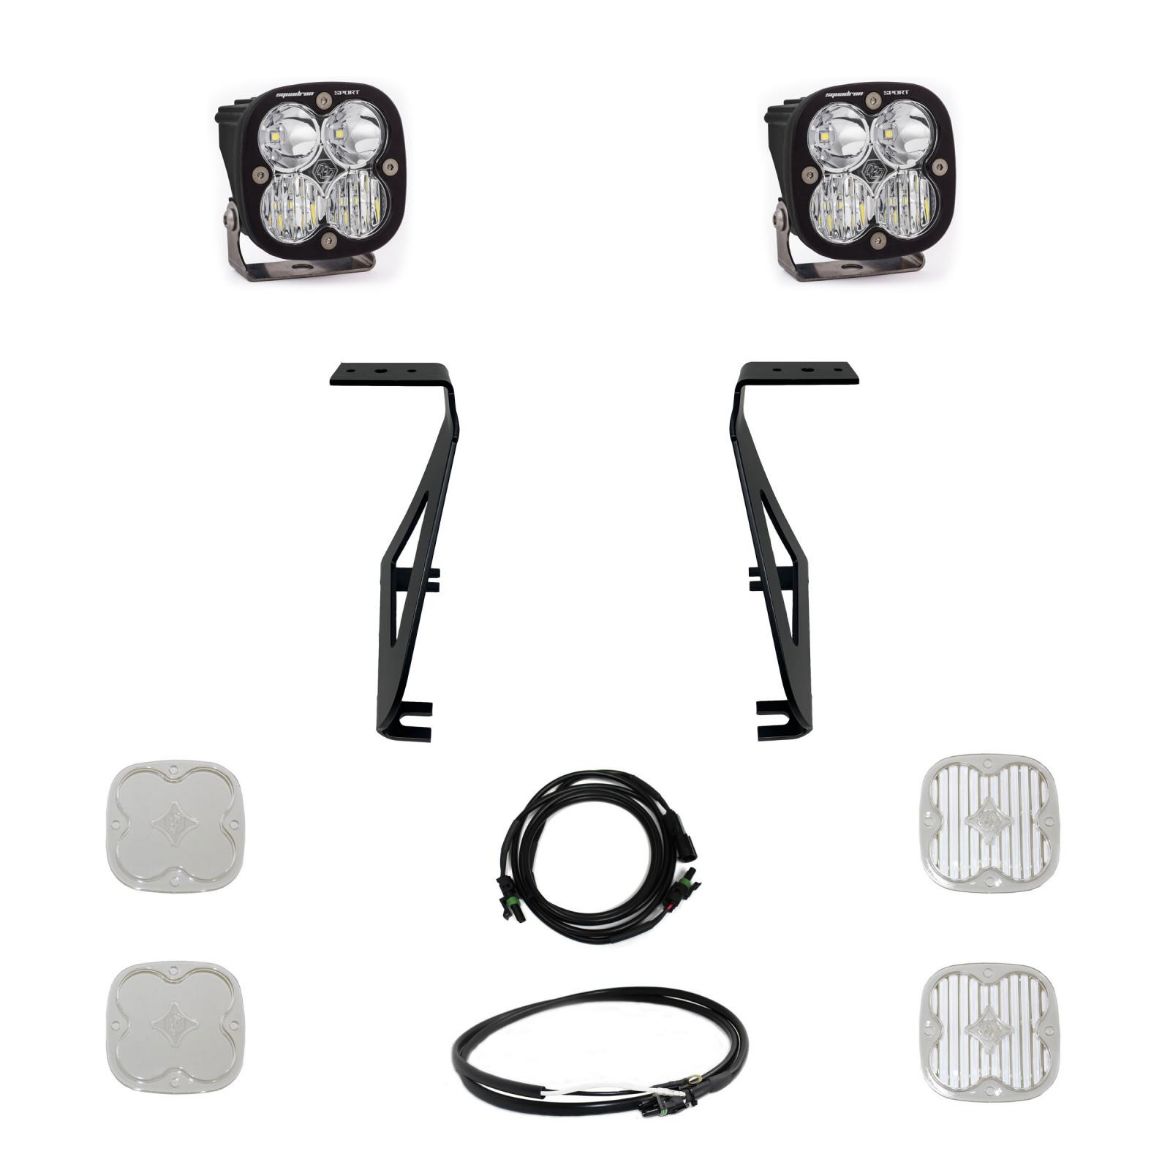 Picture of Squadron Sport A-Pillar Kit fits 21-On Ford Raptor Baja Designs